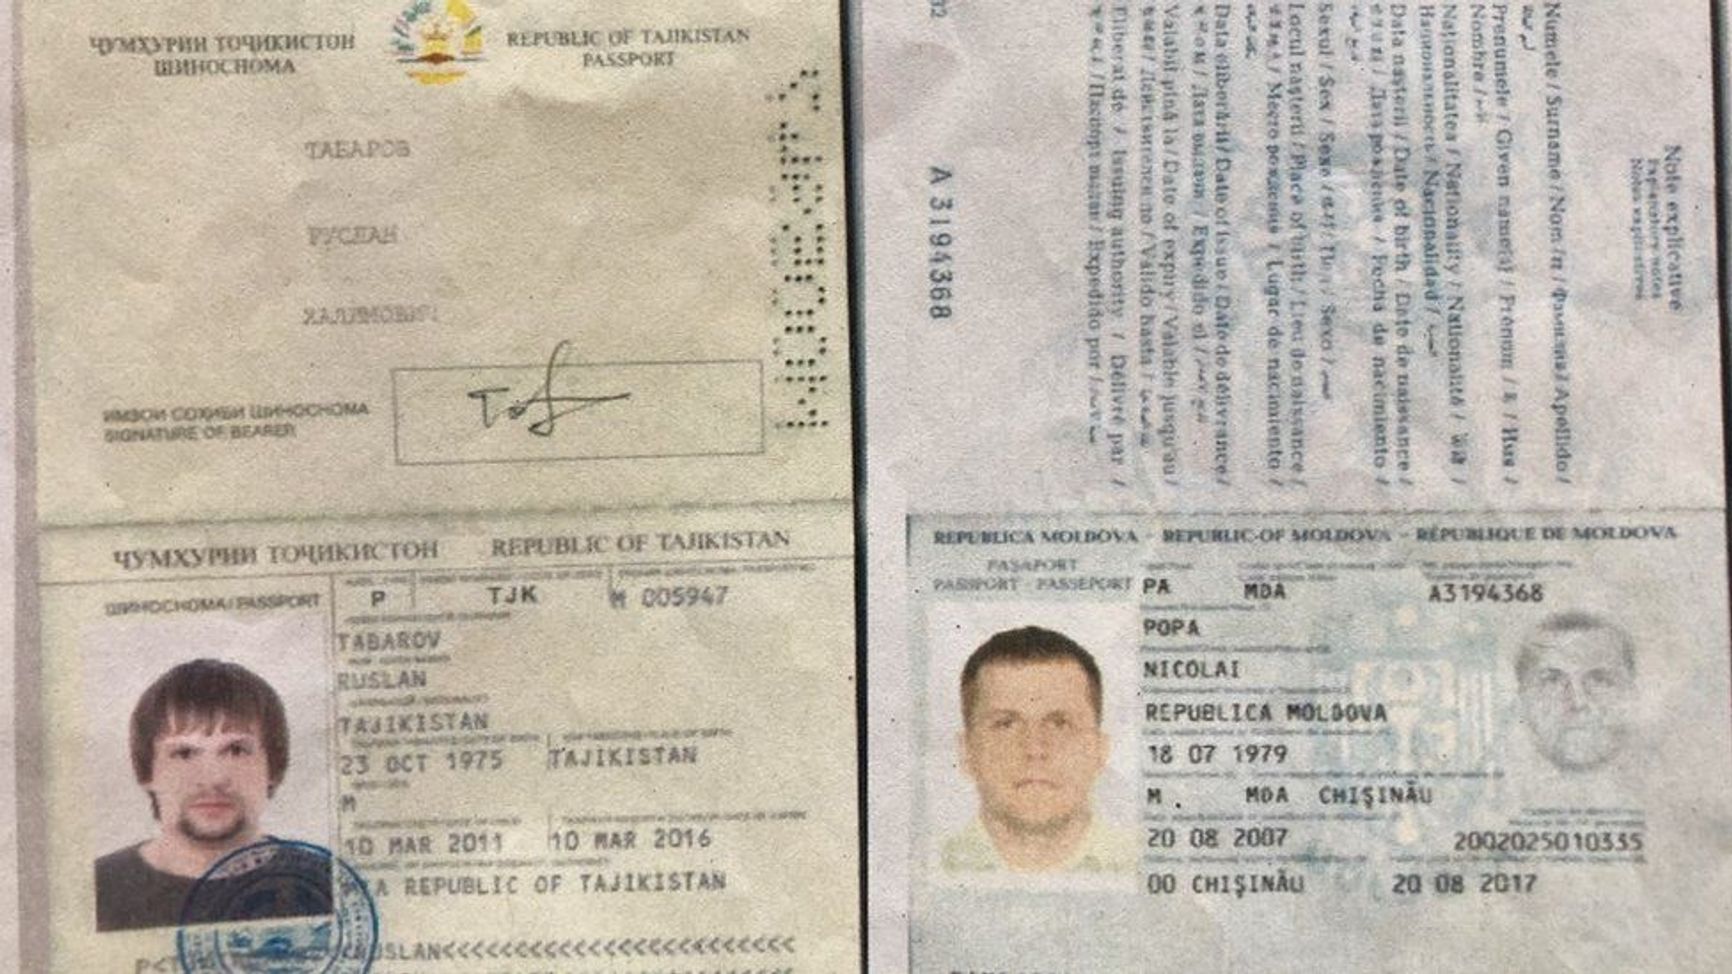 Photoshopped passport pages for Unit 29155 operatives Alexander Mishkin and Anatoly Chepiga, sent by their commander Gen. Andrey Averyanov, so they could gain access to the Vrbětice storage facility